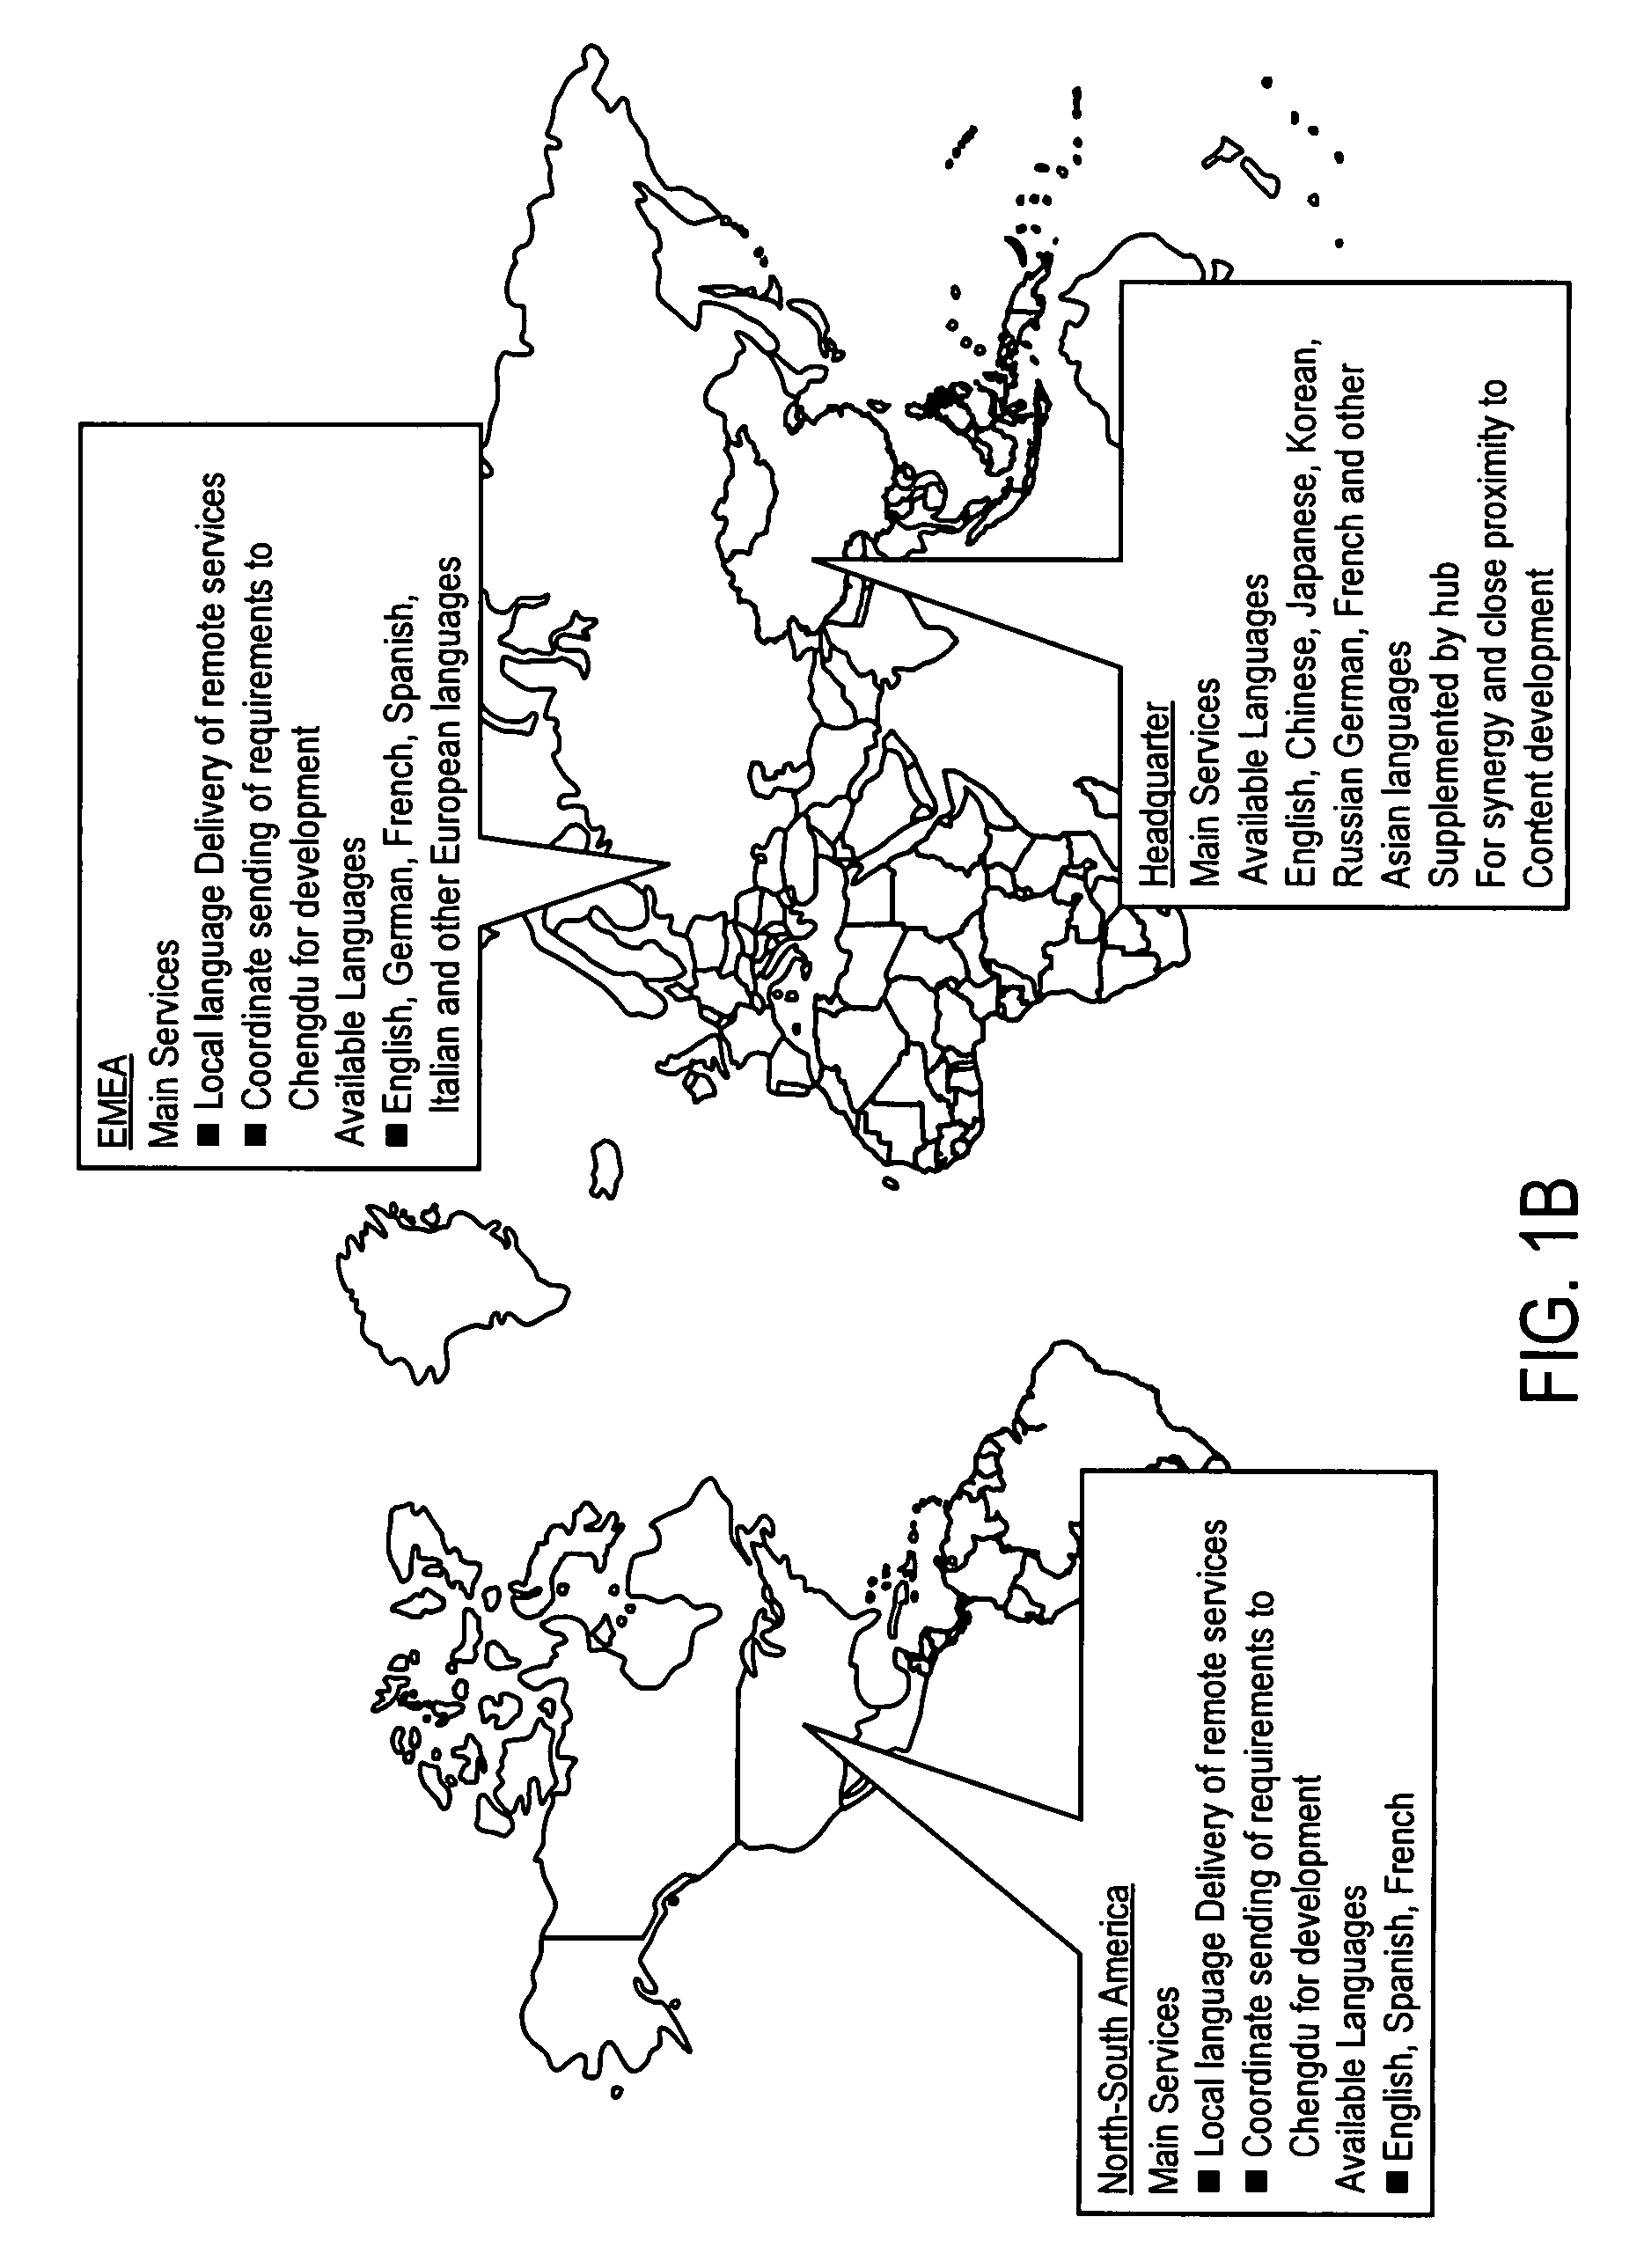 Method of developing specific content and creating standardized content from the specific content